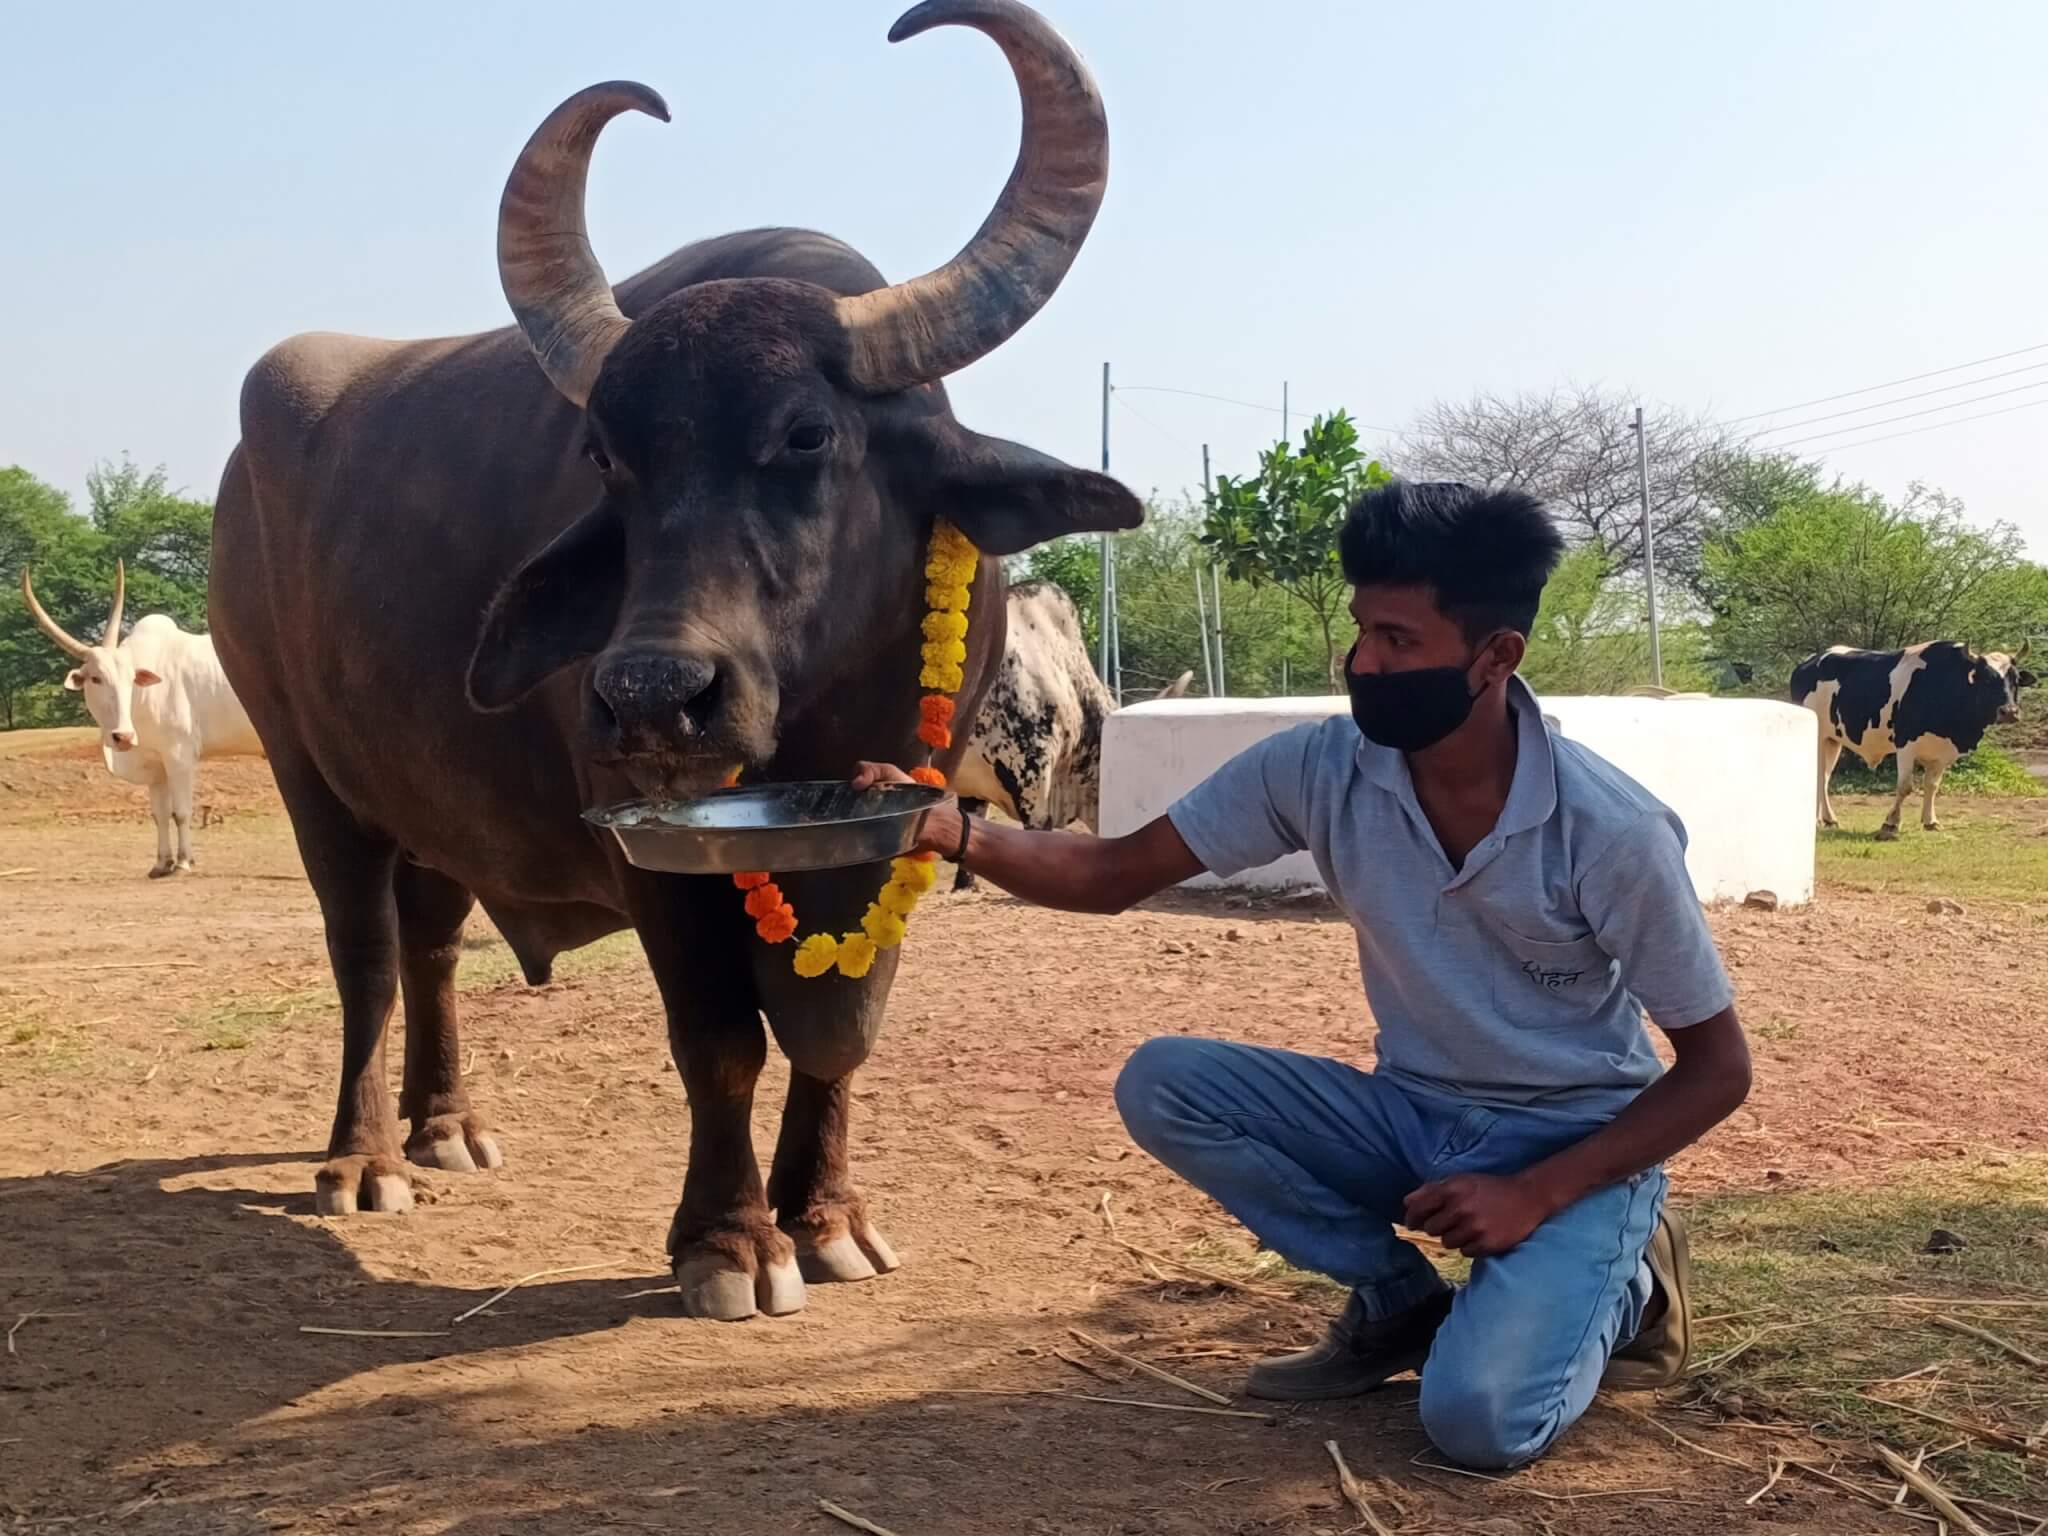 Rescued buffalo Kalu has nearly cleaned his plate, obviously a fan of the special holiday snacks.